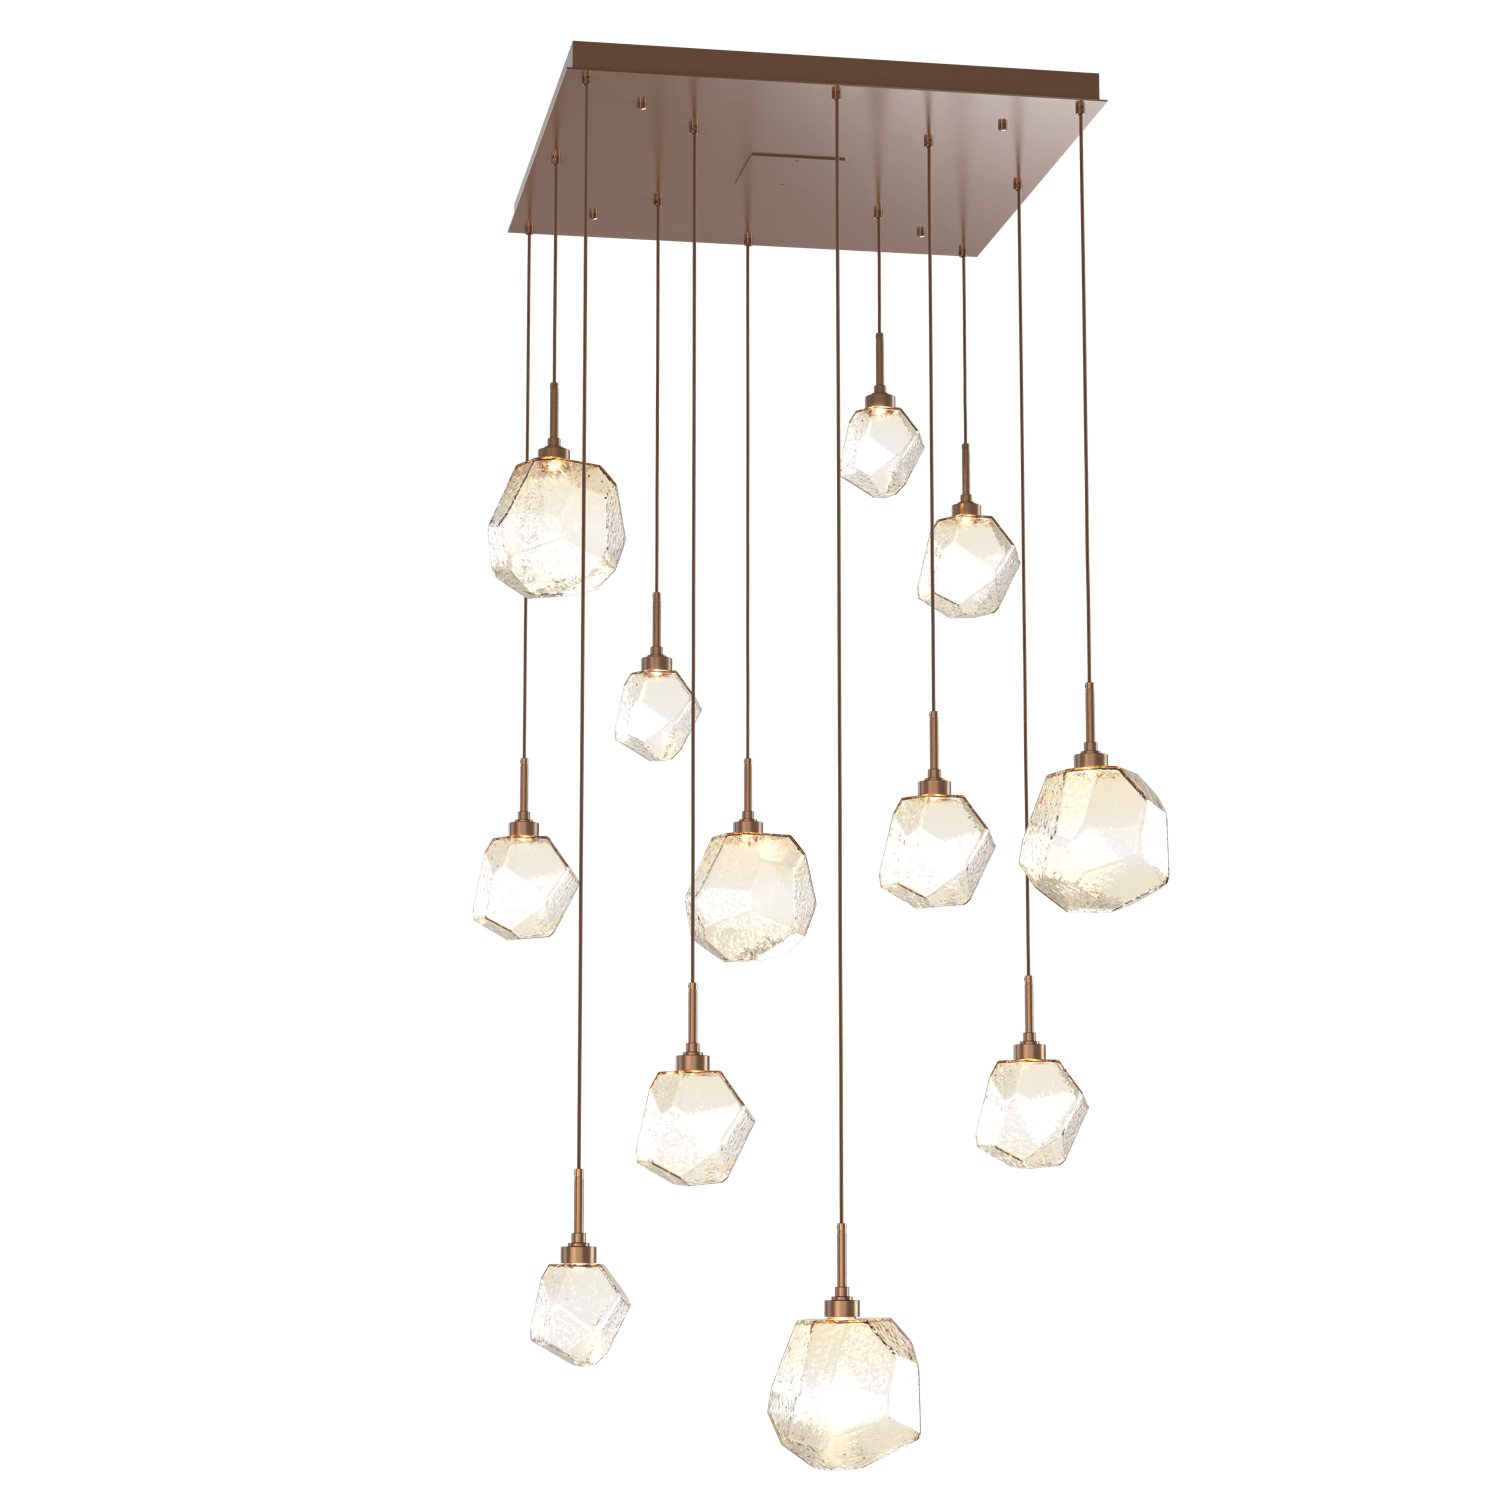 CHB0039-12-BB-A-Hammerton-Studio-Gem-12-light-square-pendant-chandelier-with-burnished-bronze-finish-and-amber-blown-glass-shades-and-LED-lamping